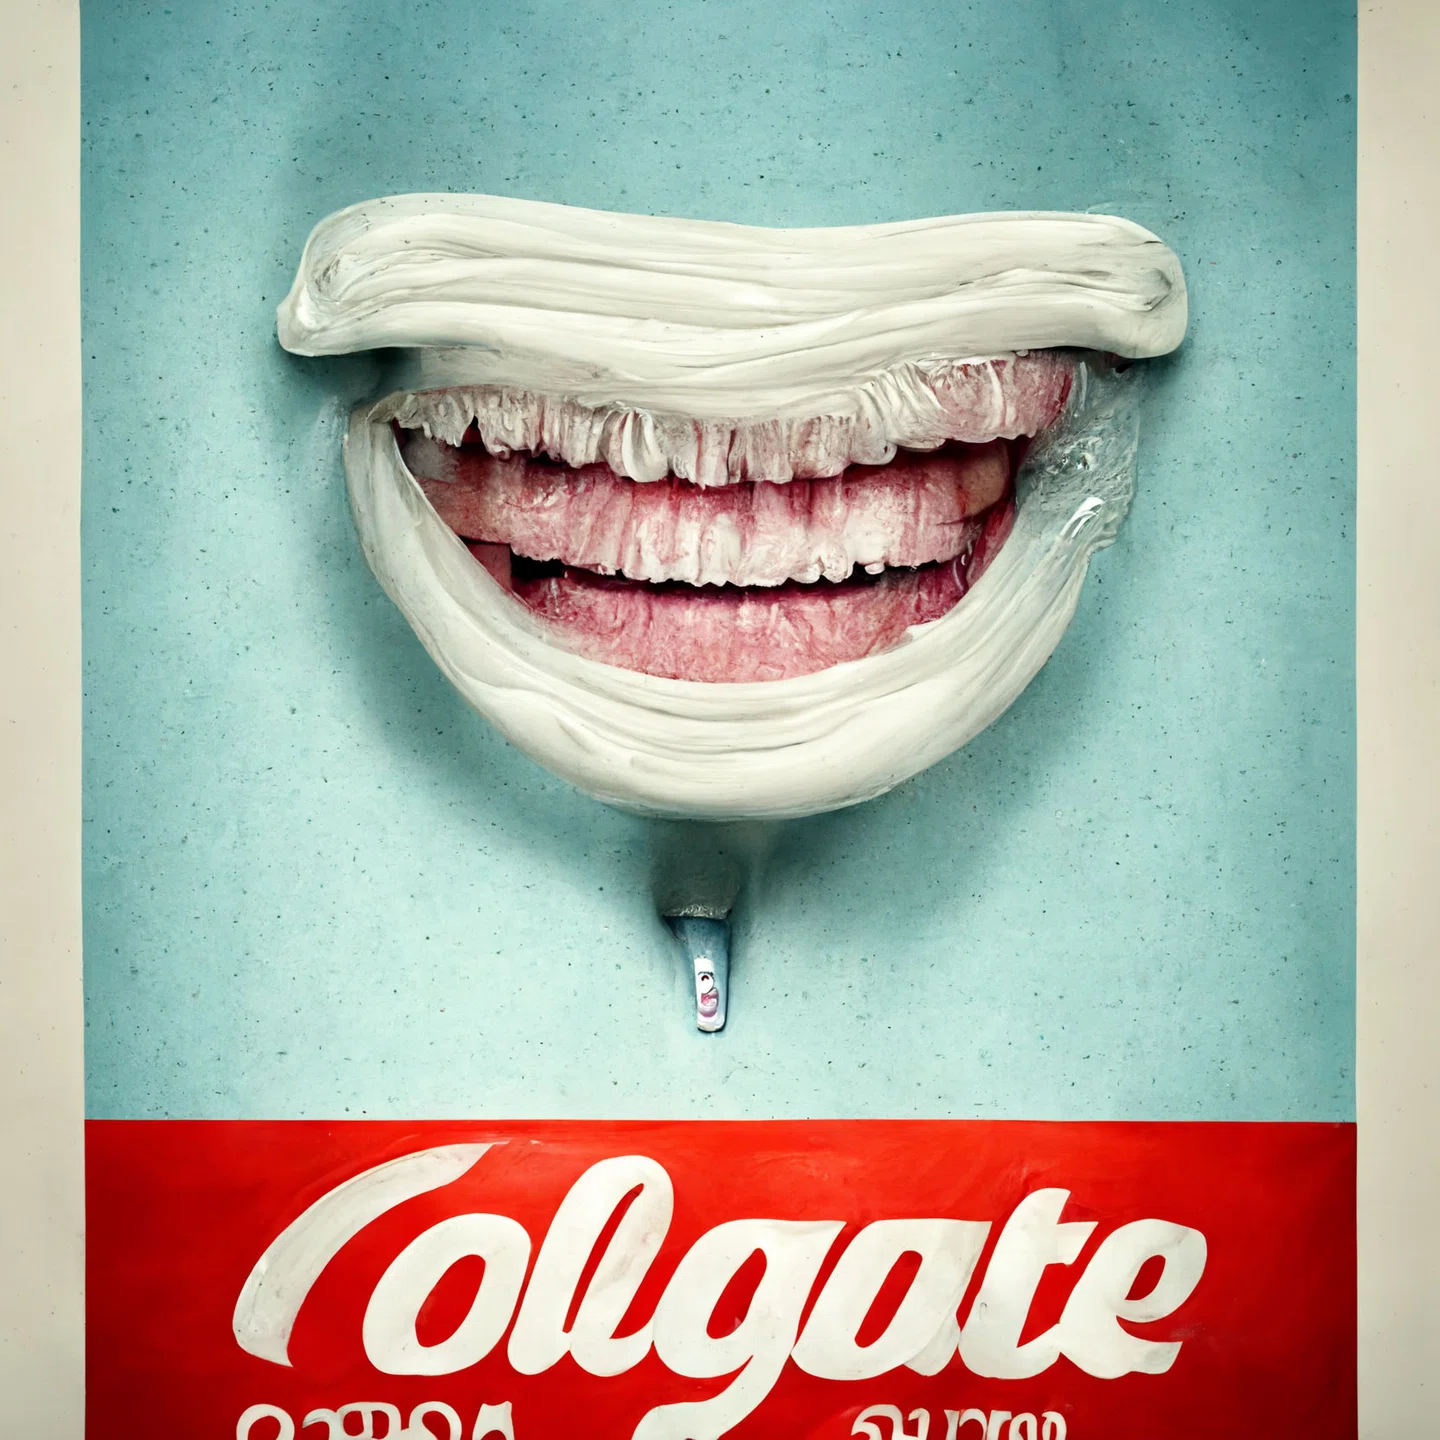 colgate toothpaste commercial